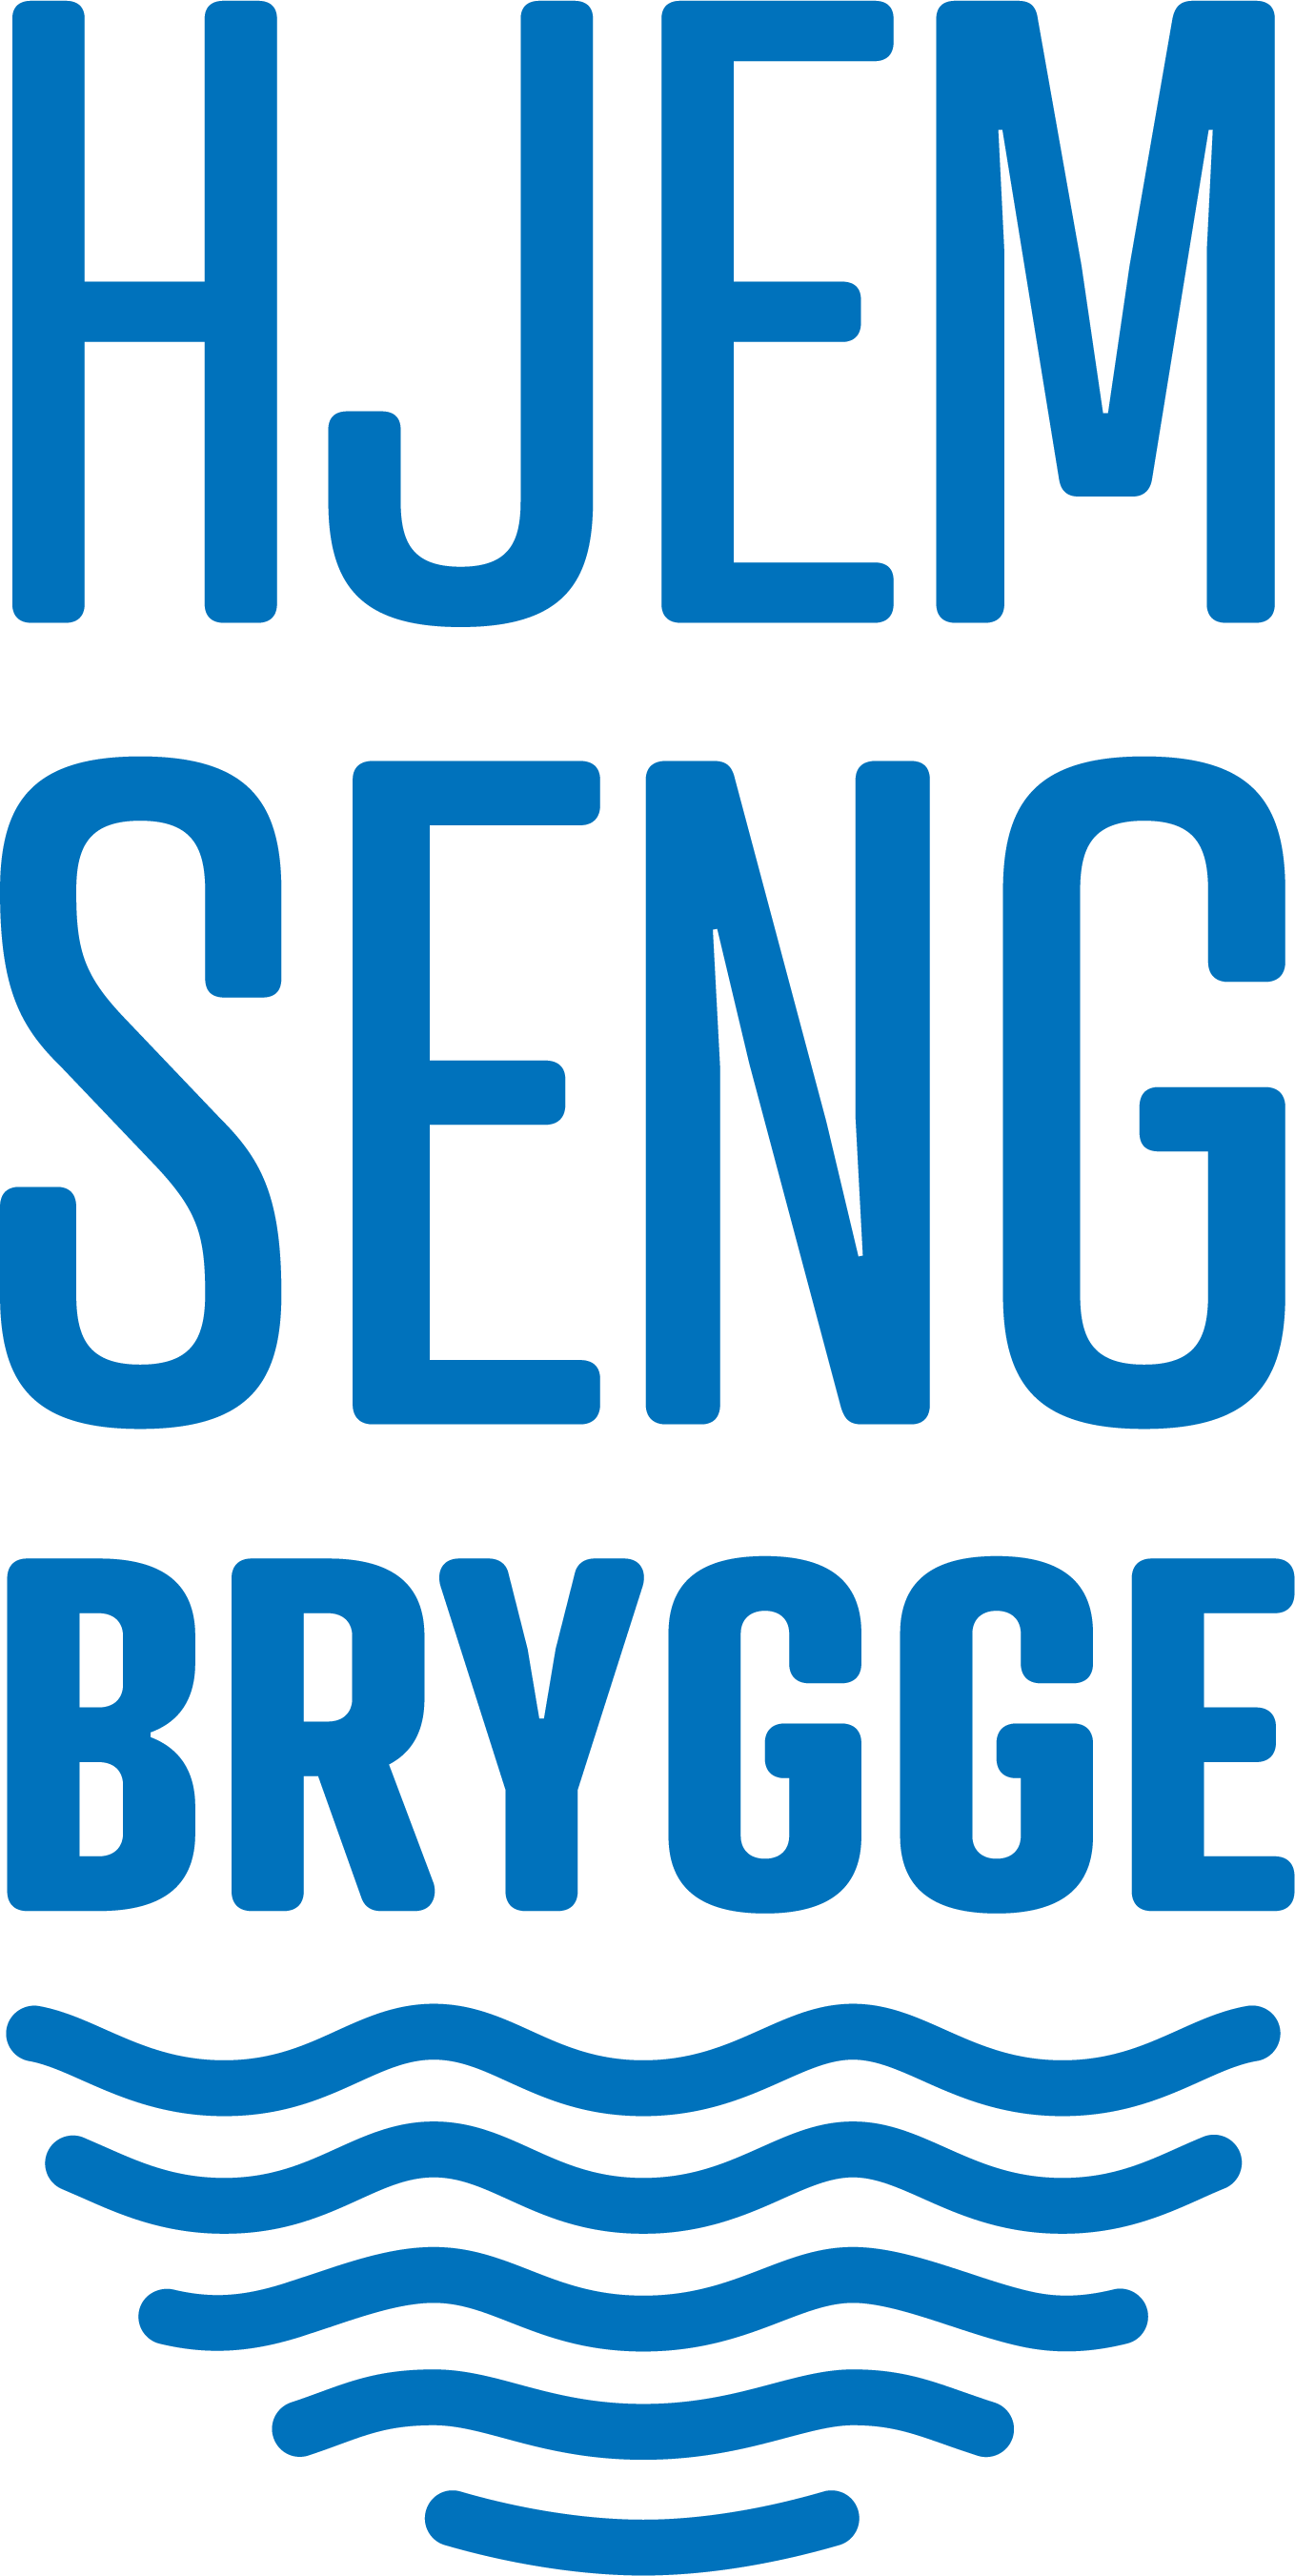 The logo of the feed named Hjemseng Brygge.